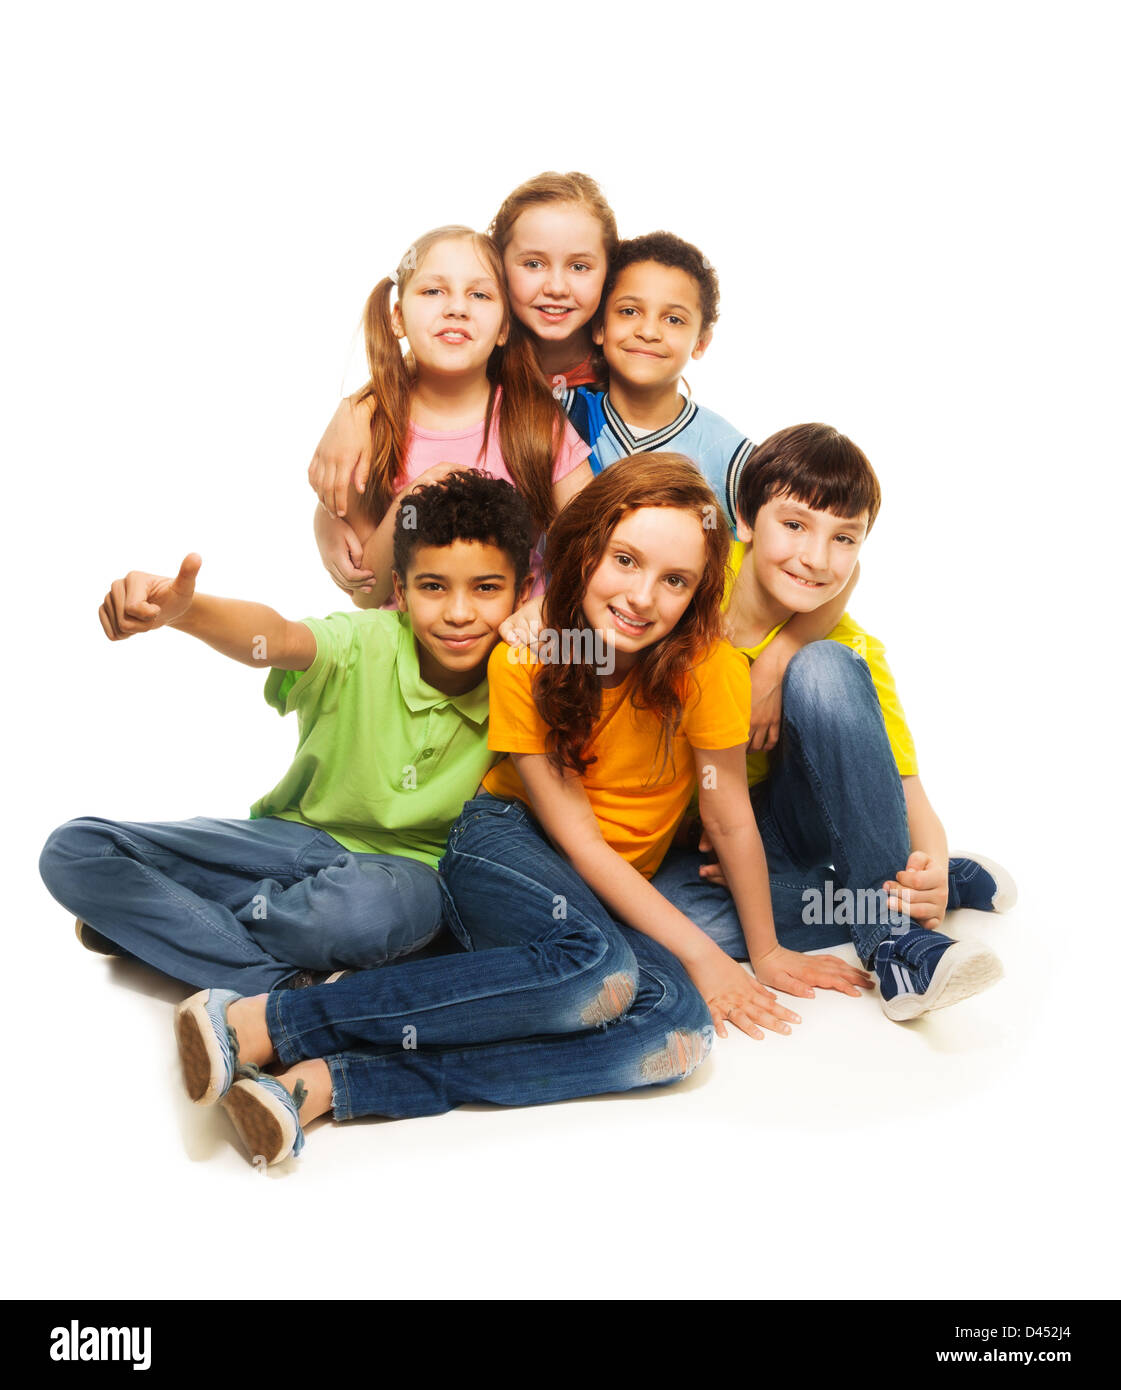 Positive happy group of kids sitting together, isolated on white Stock Photo